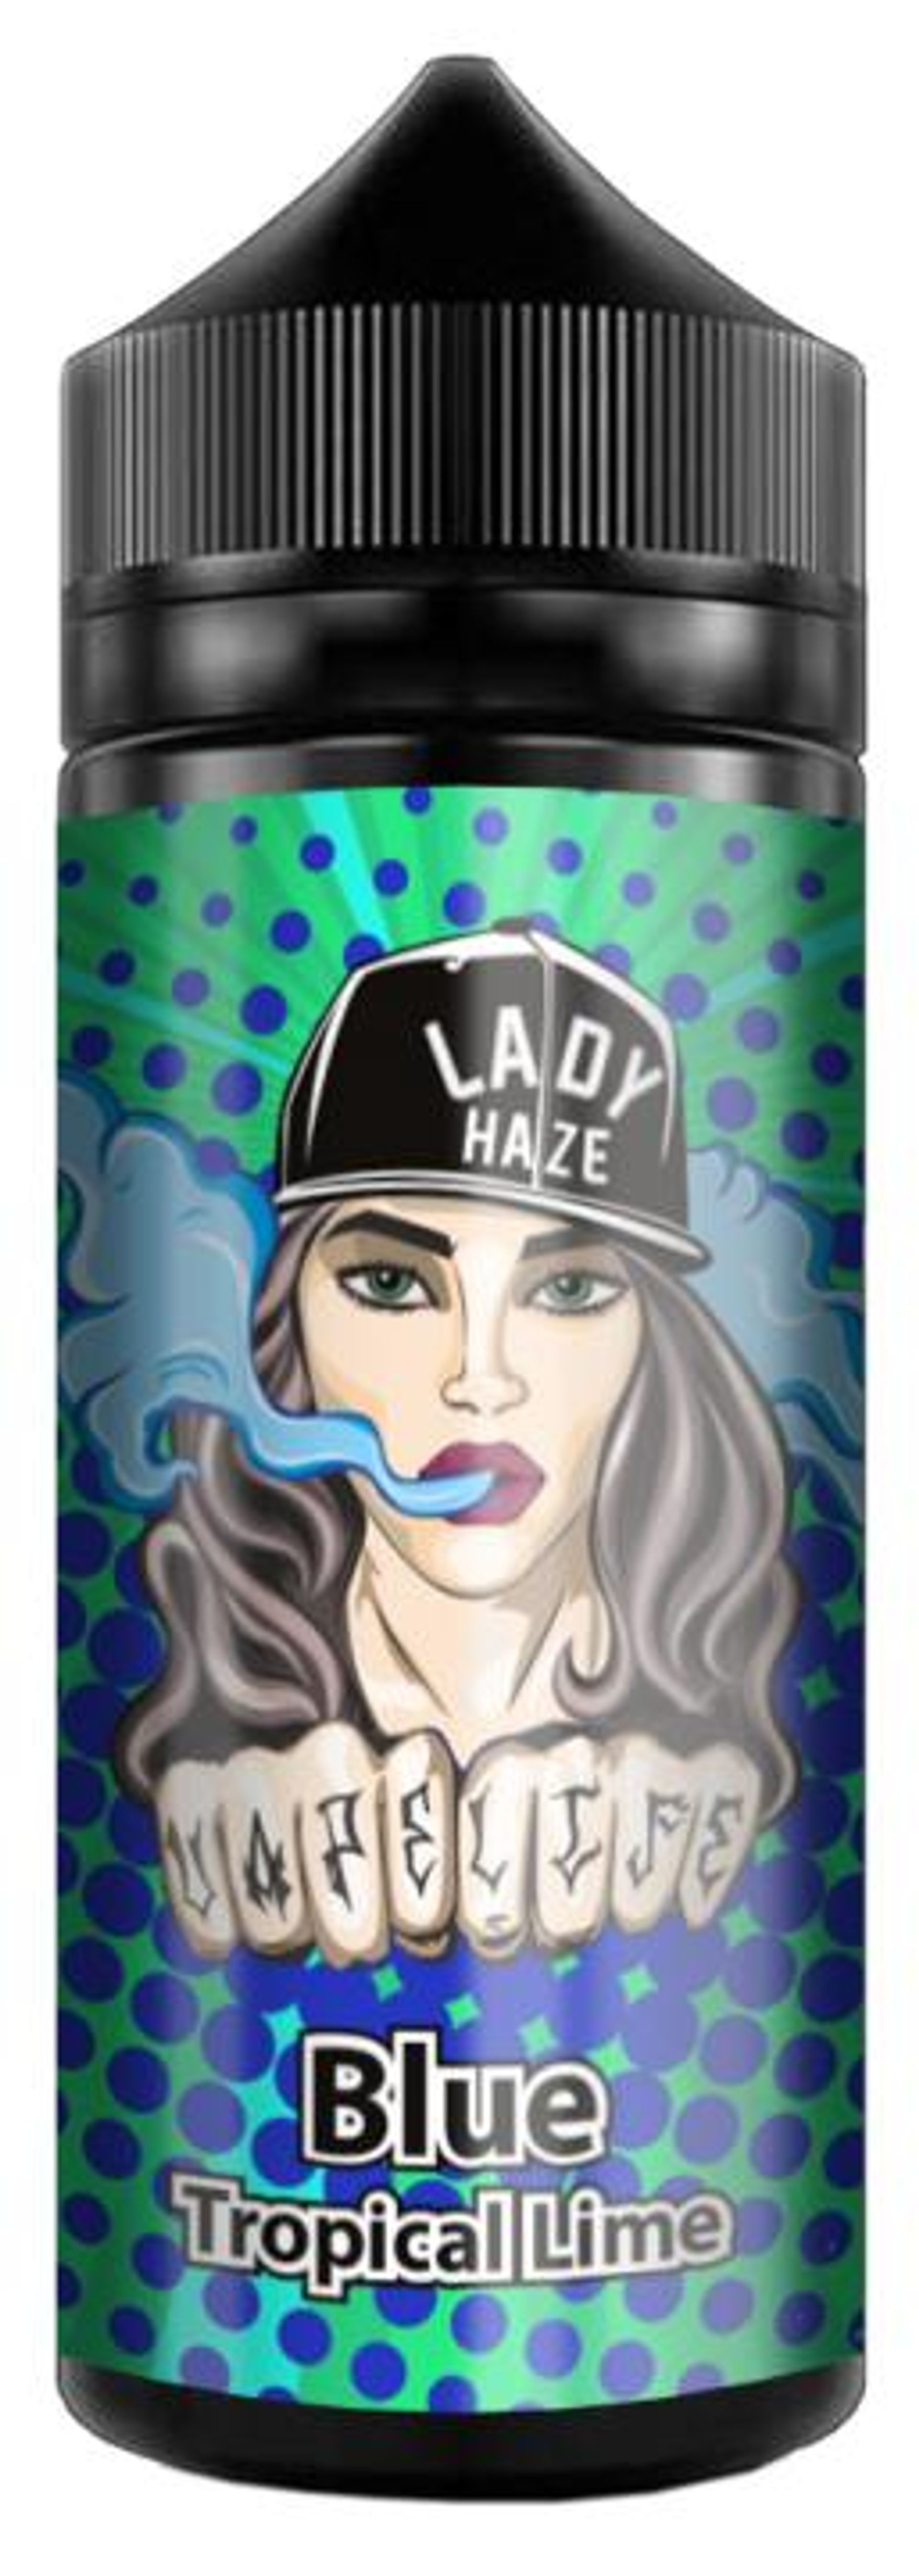 Image of Blue Tropical Lime by Lady Haze